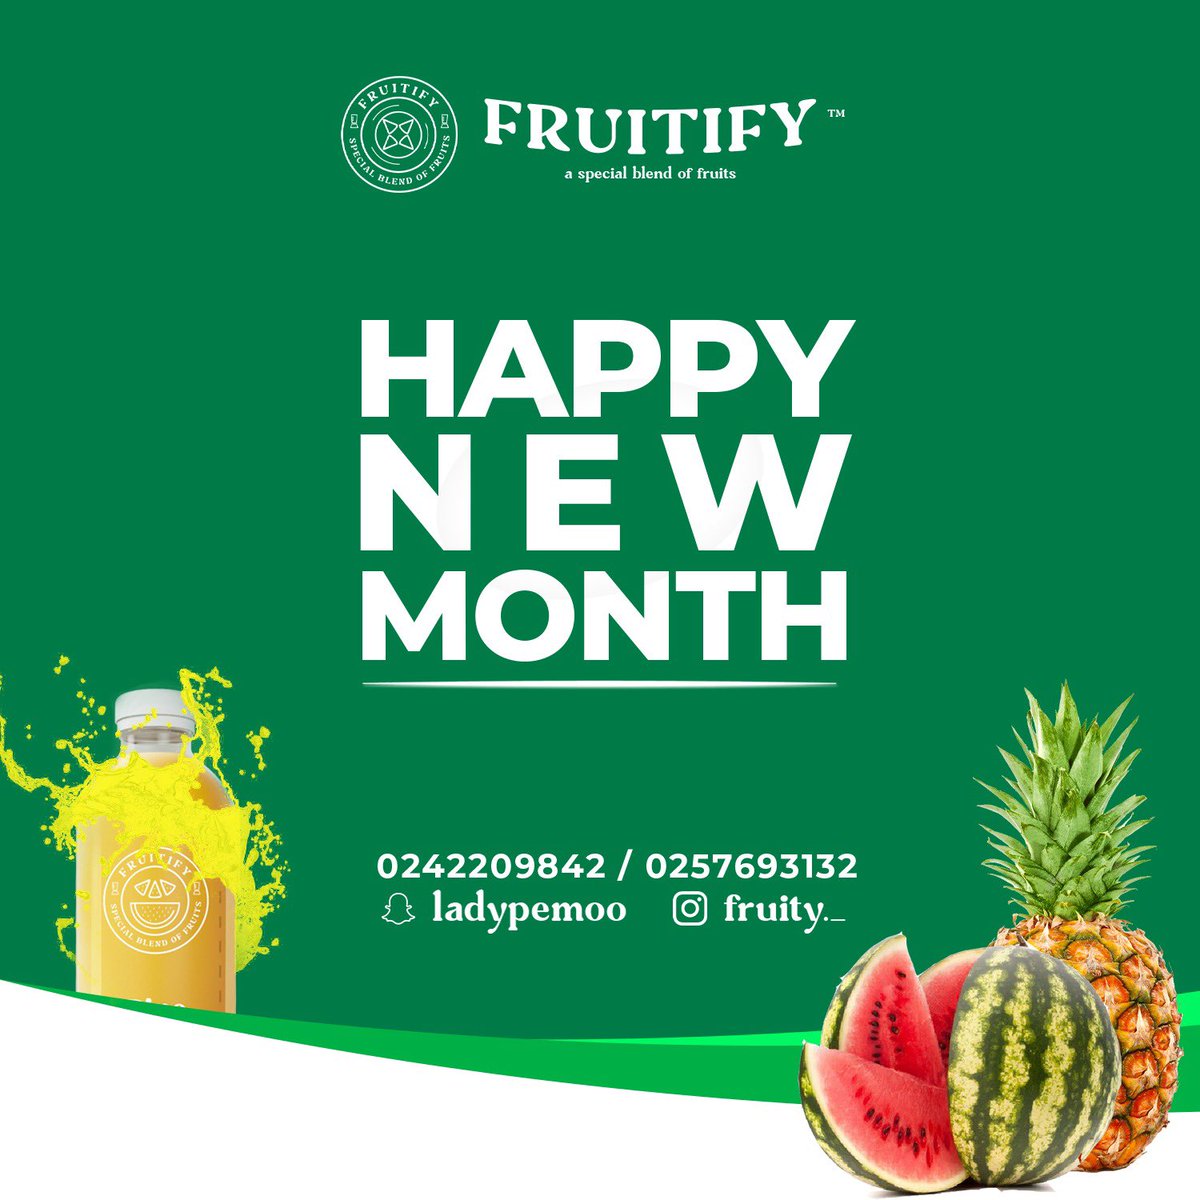 Fruitify wishes you a happy new month! May it be filled with growth, success. Don't forget to stay healthy and drink some juice to keep you going 🍉🥭🍍☺️